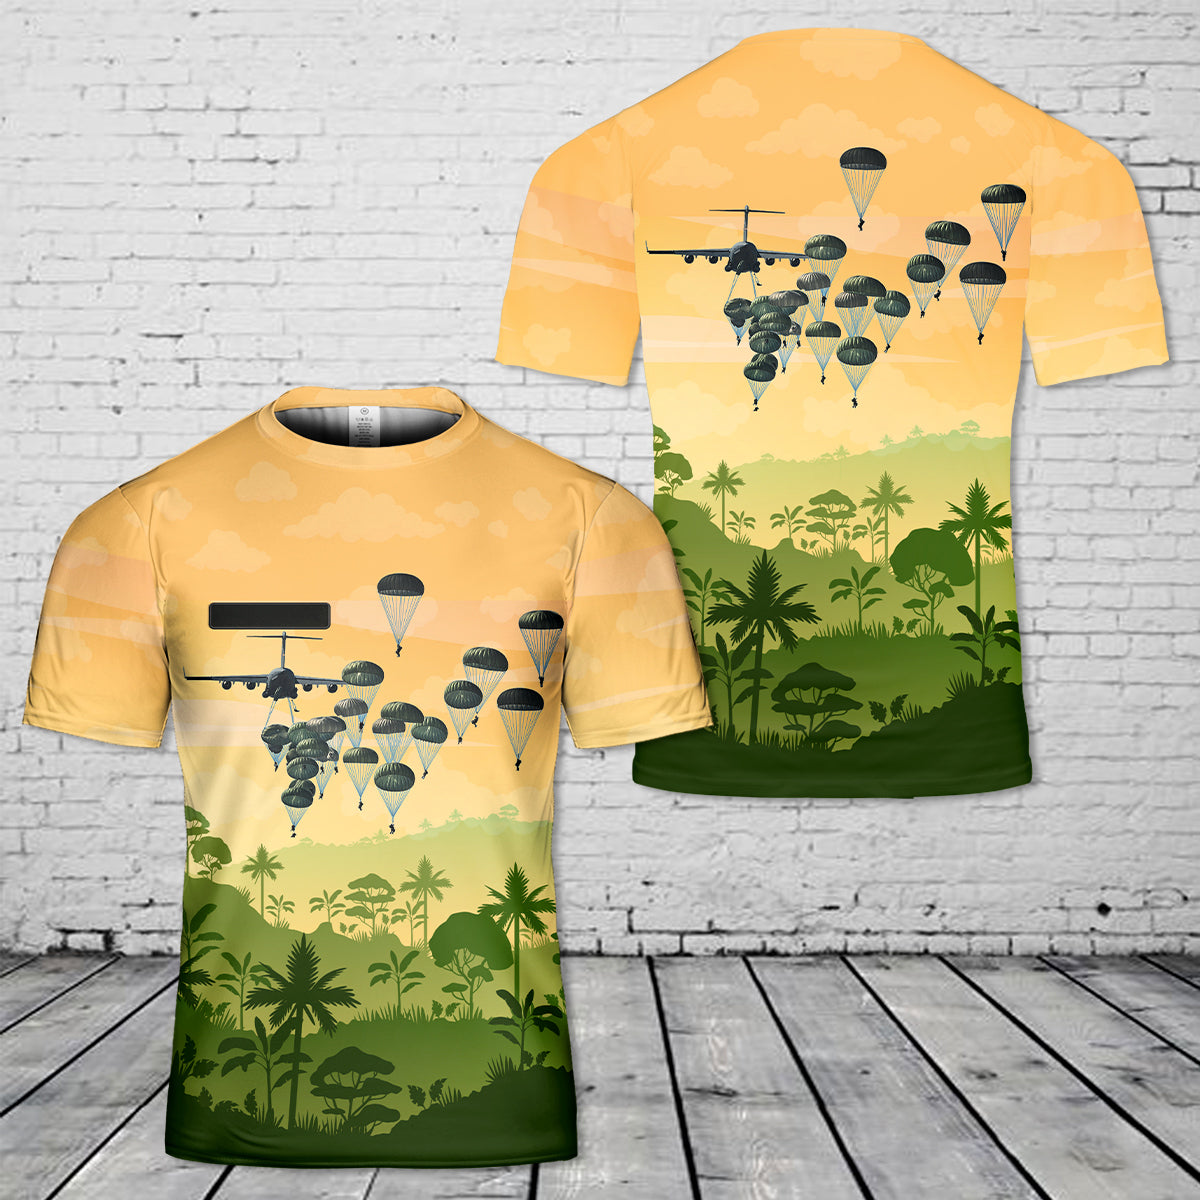 Custom Name US Army Paratroopers With The 82nd Airborne Division Parachute T-Shirt 3D